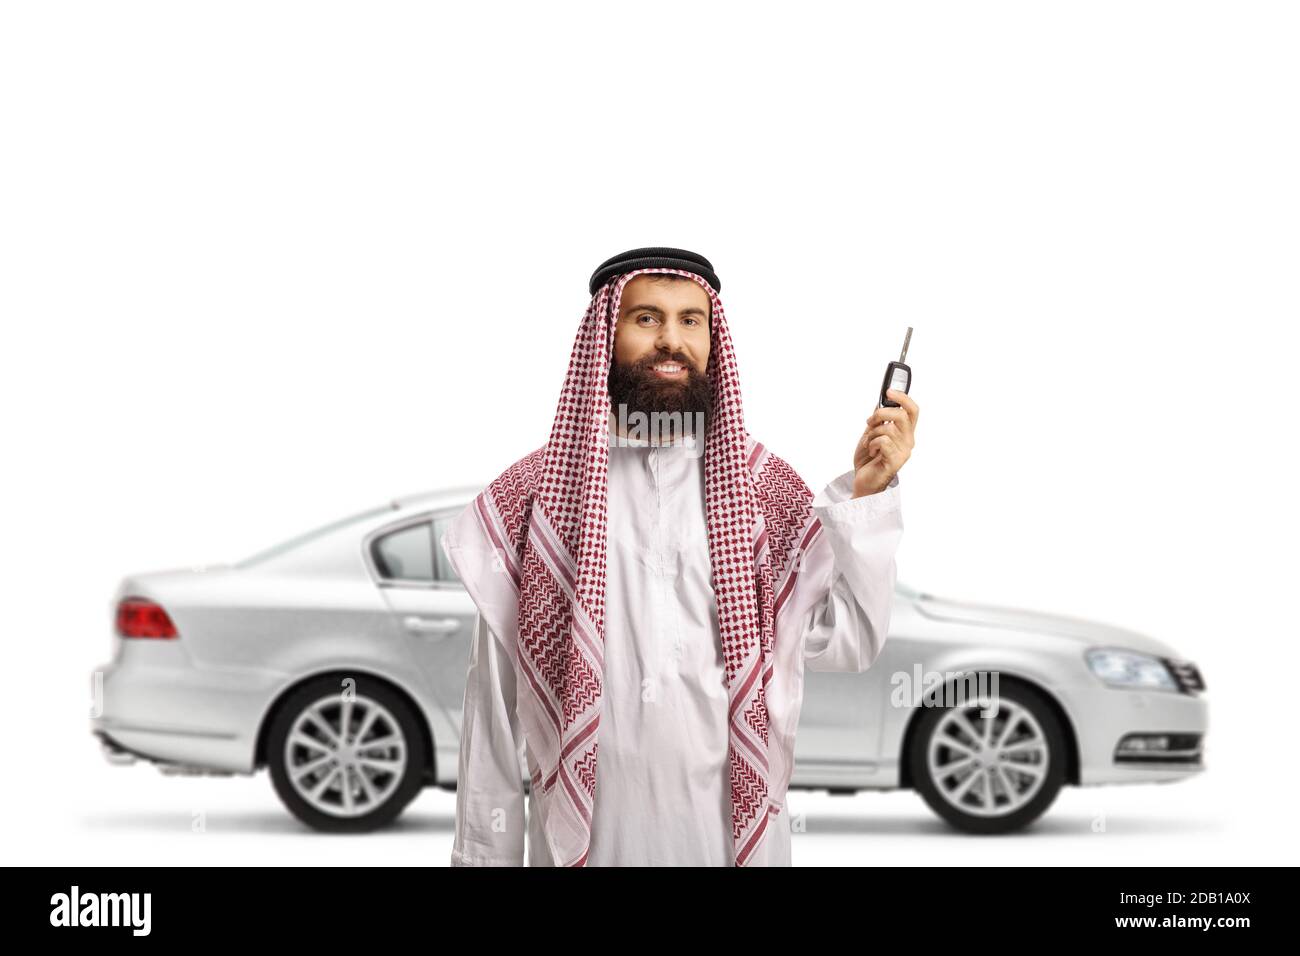 Saudi arab man holding car keys from a new silver car isolated on white background Stock Photo